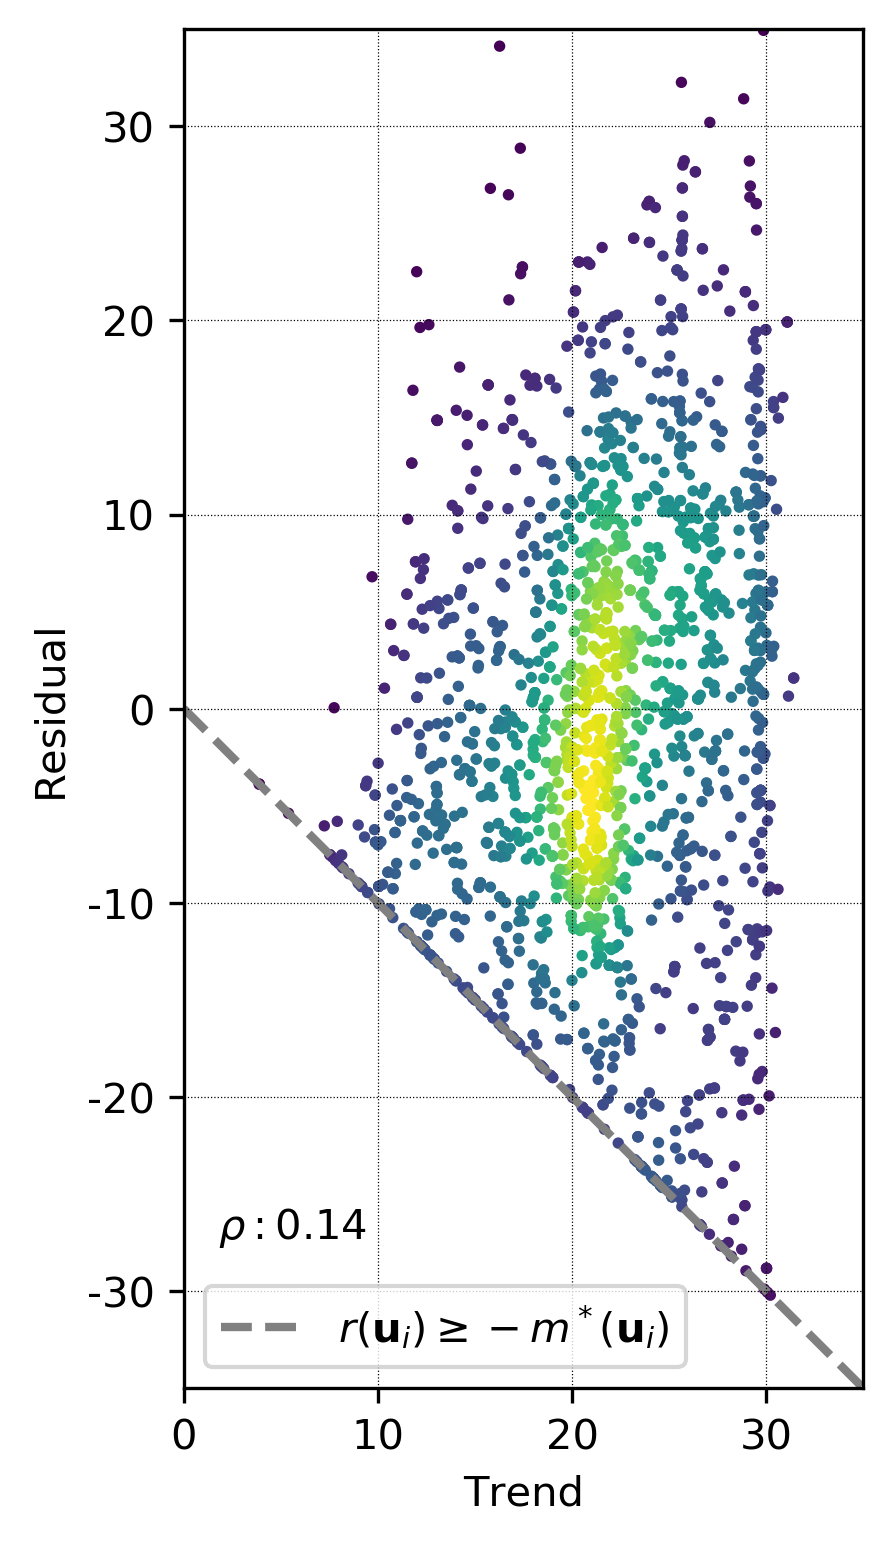 Trend-residual scatter plot illustrating the physical constraint introduced by the additive decomposition of non-negative variables.